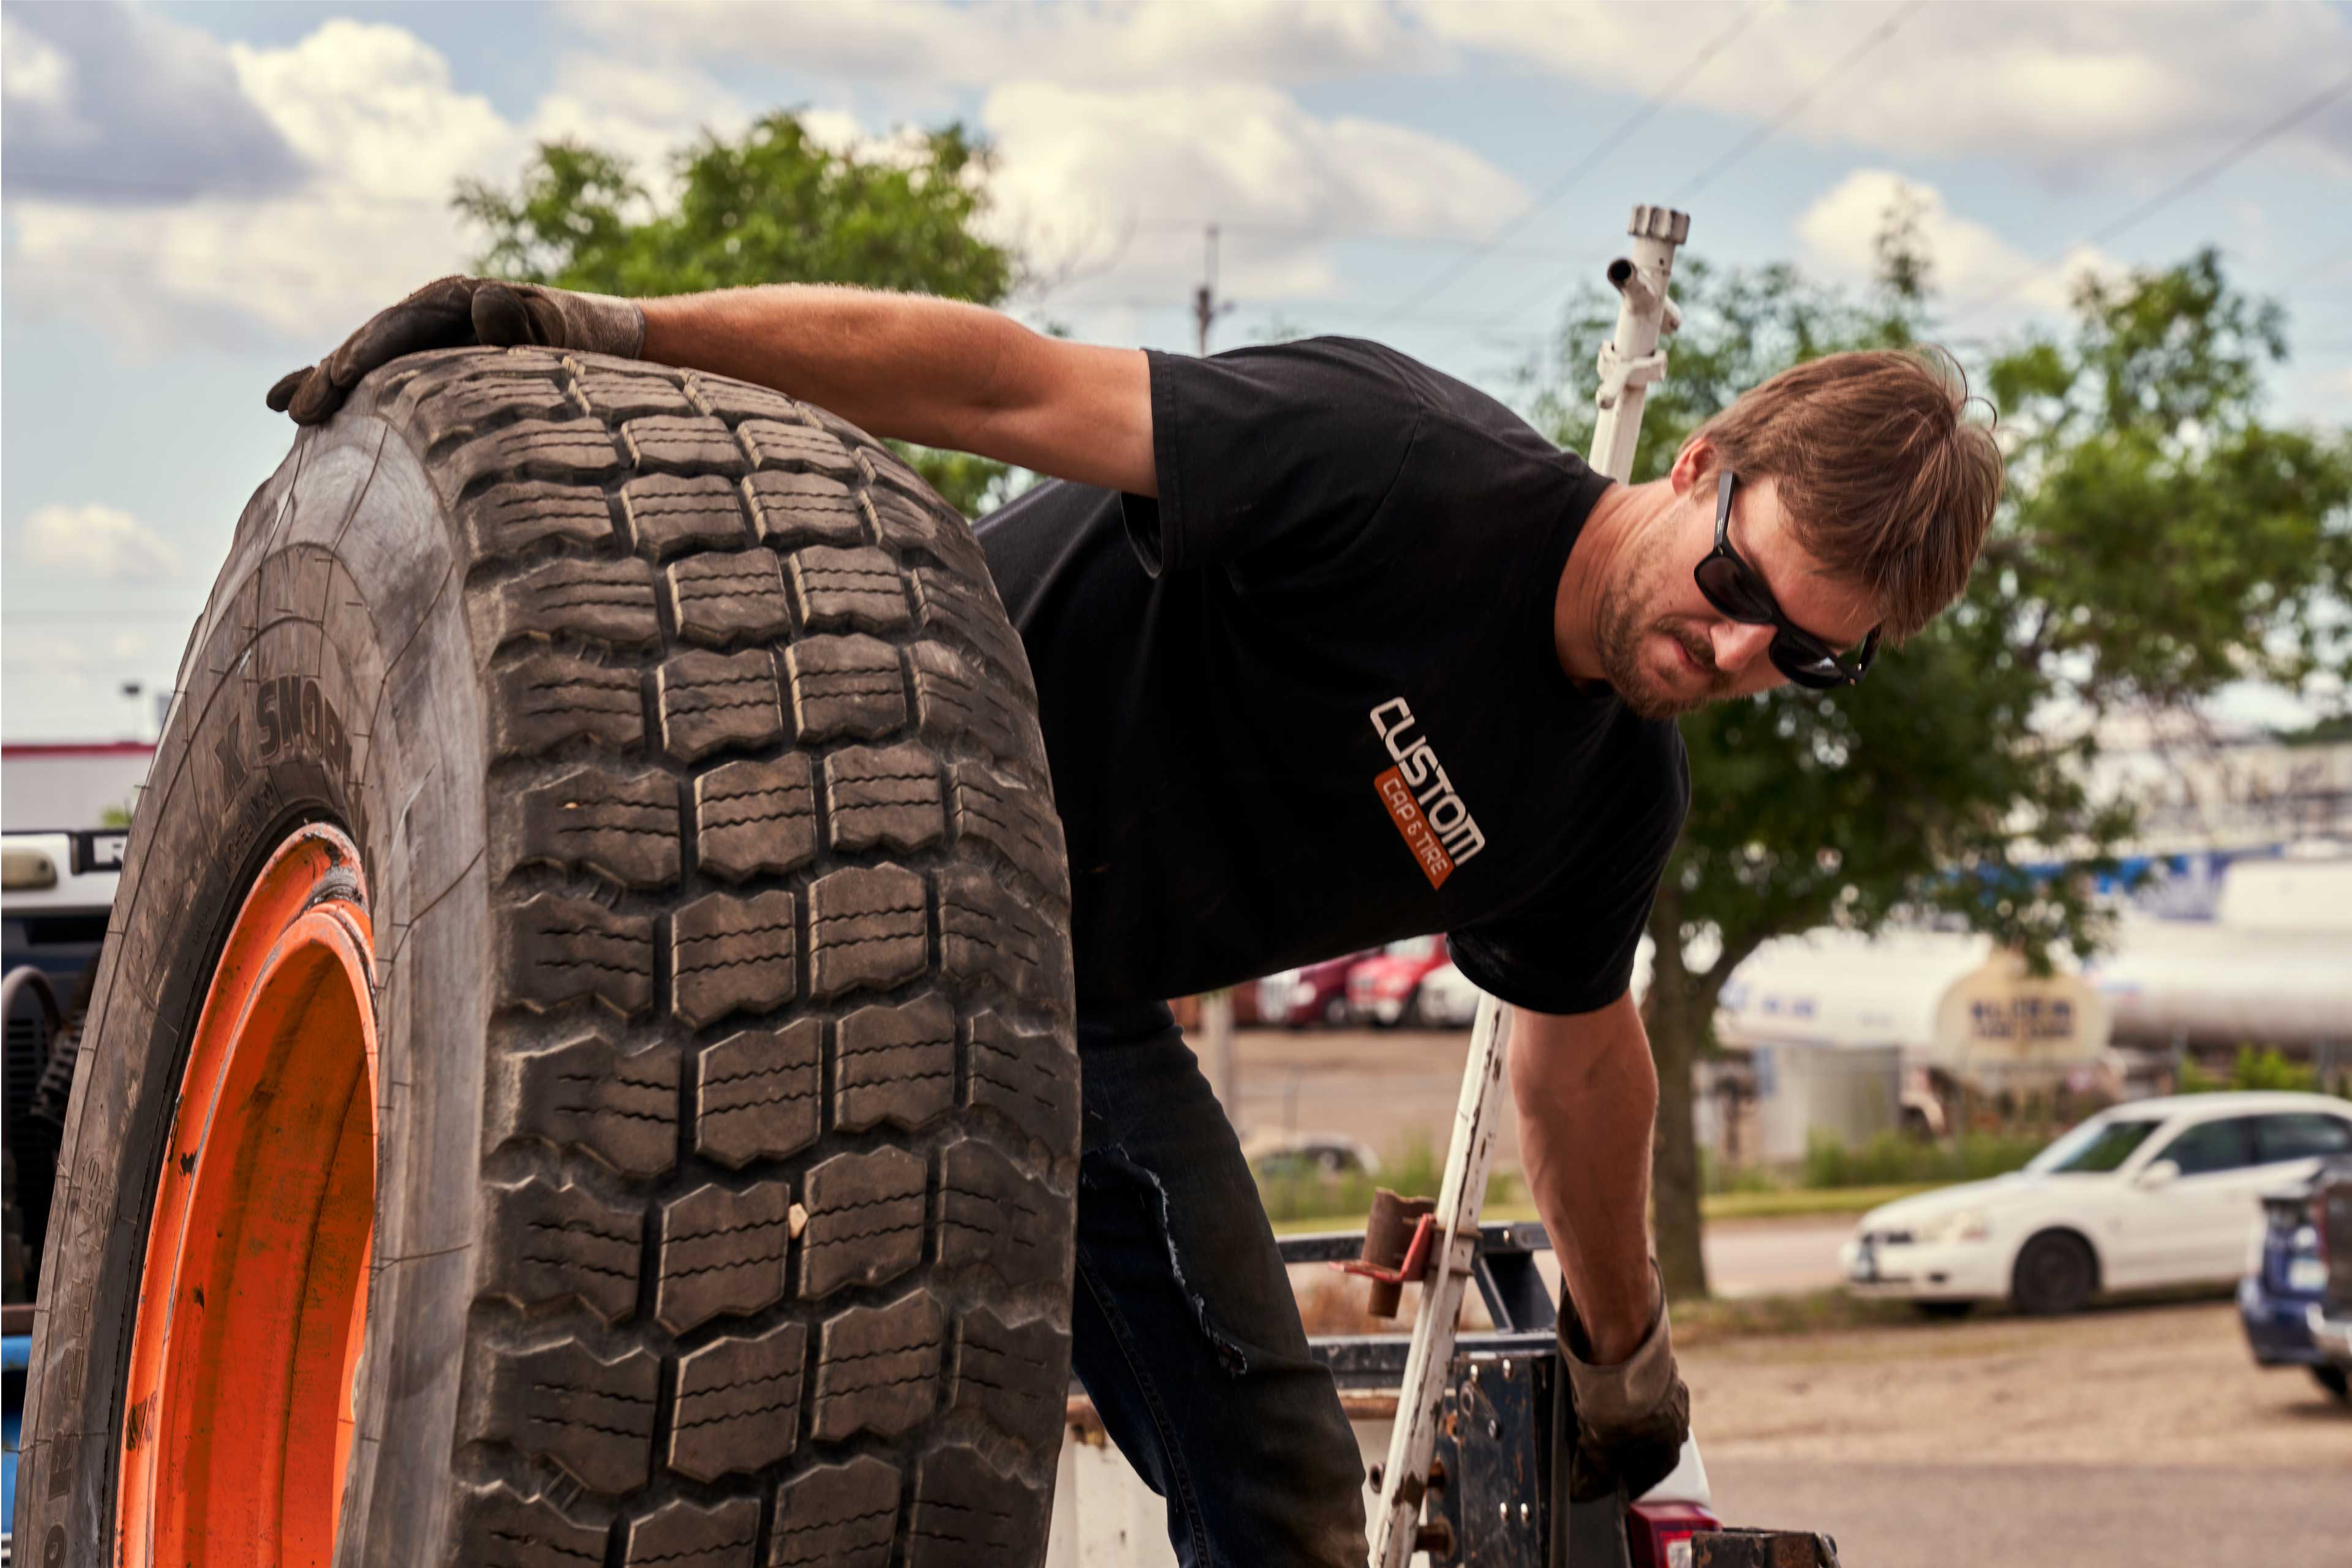 A Custom Cap and Tire employee wearing a branded t-shirt moves a tire.